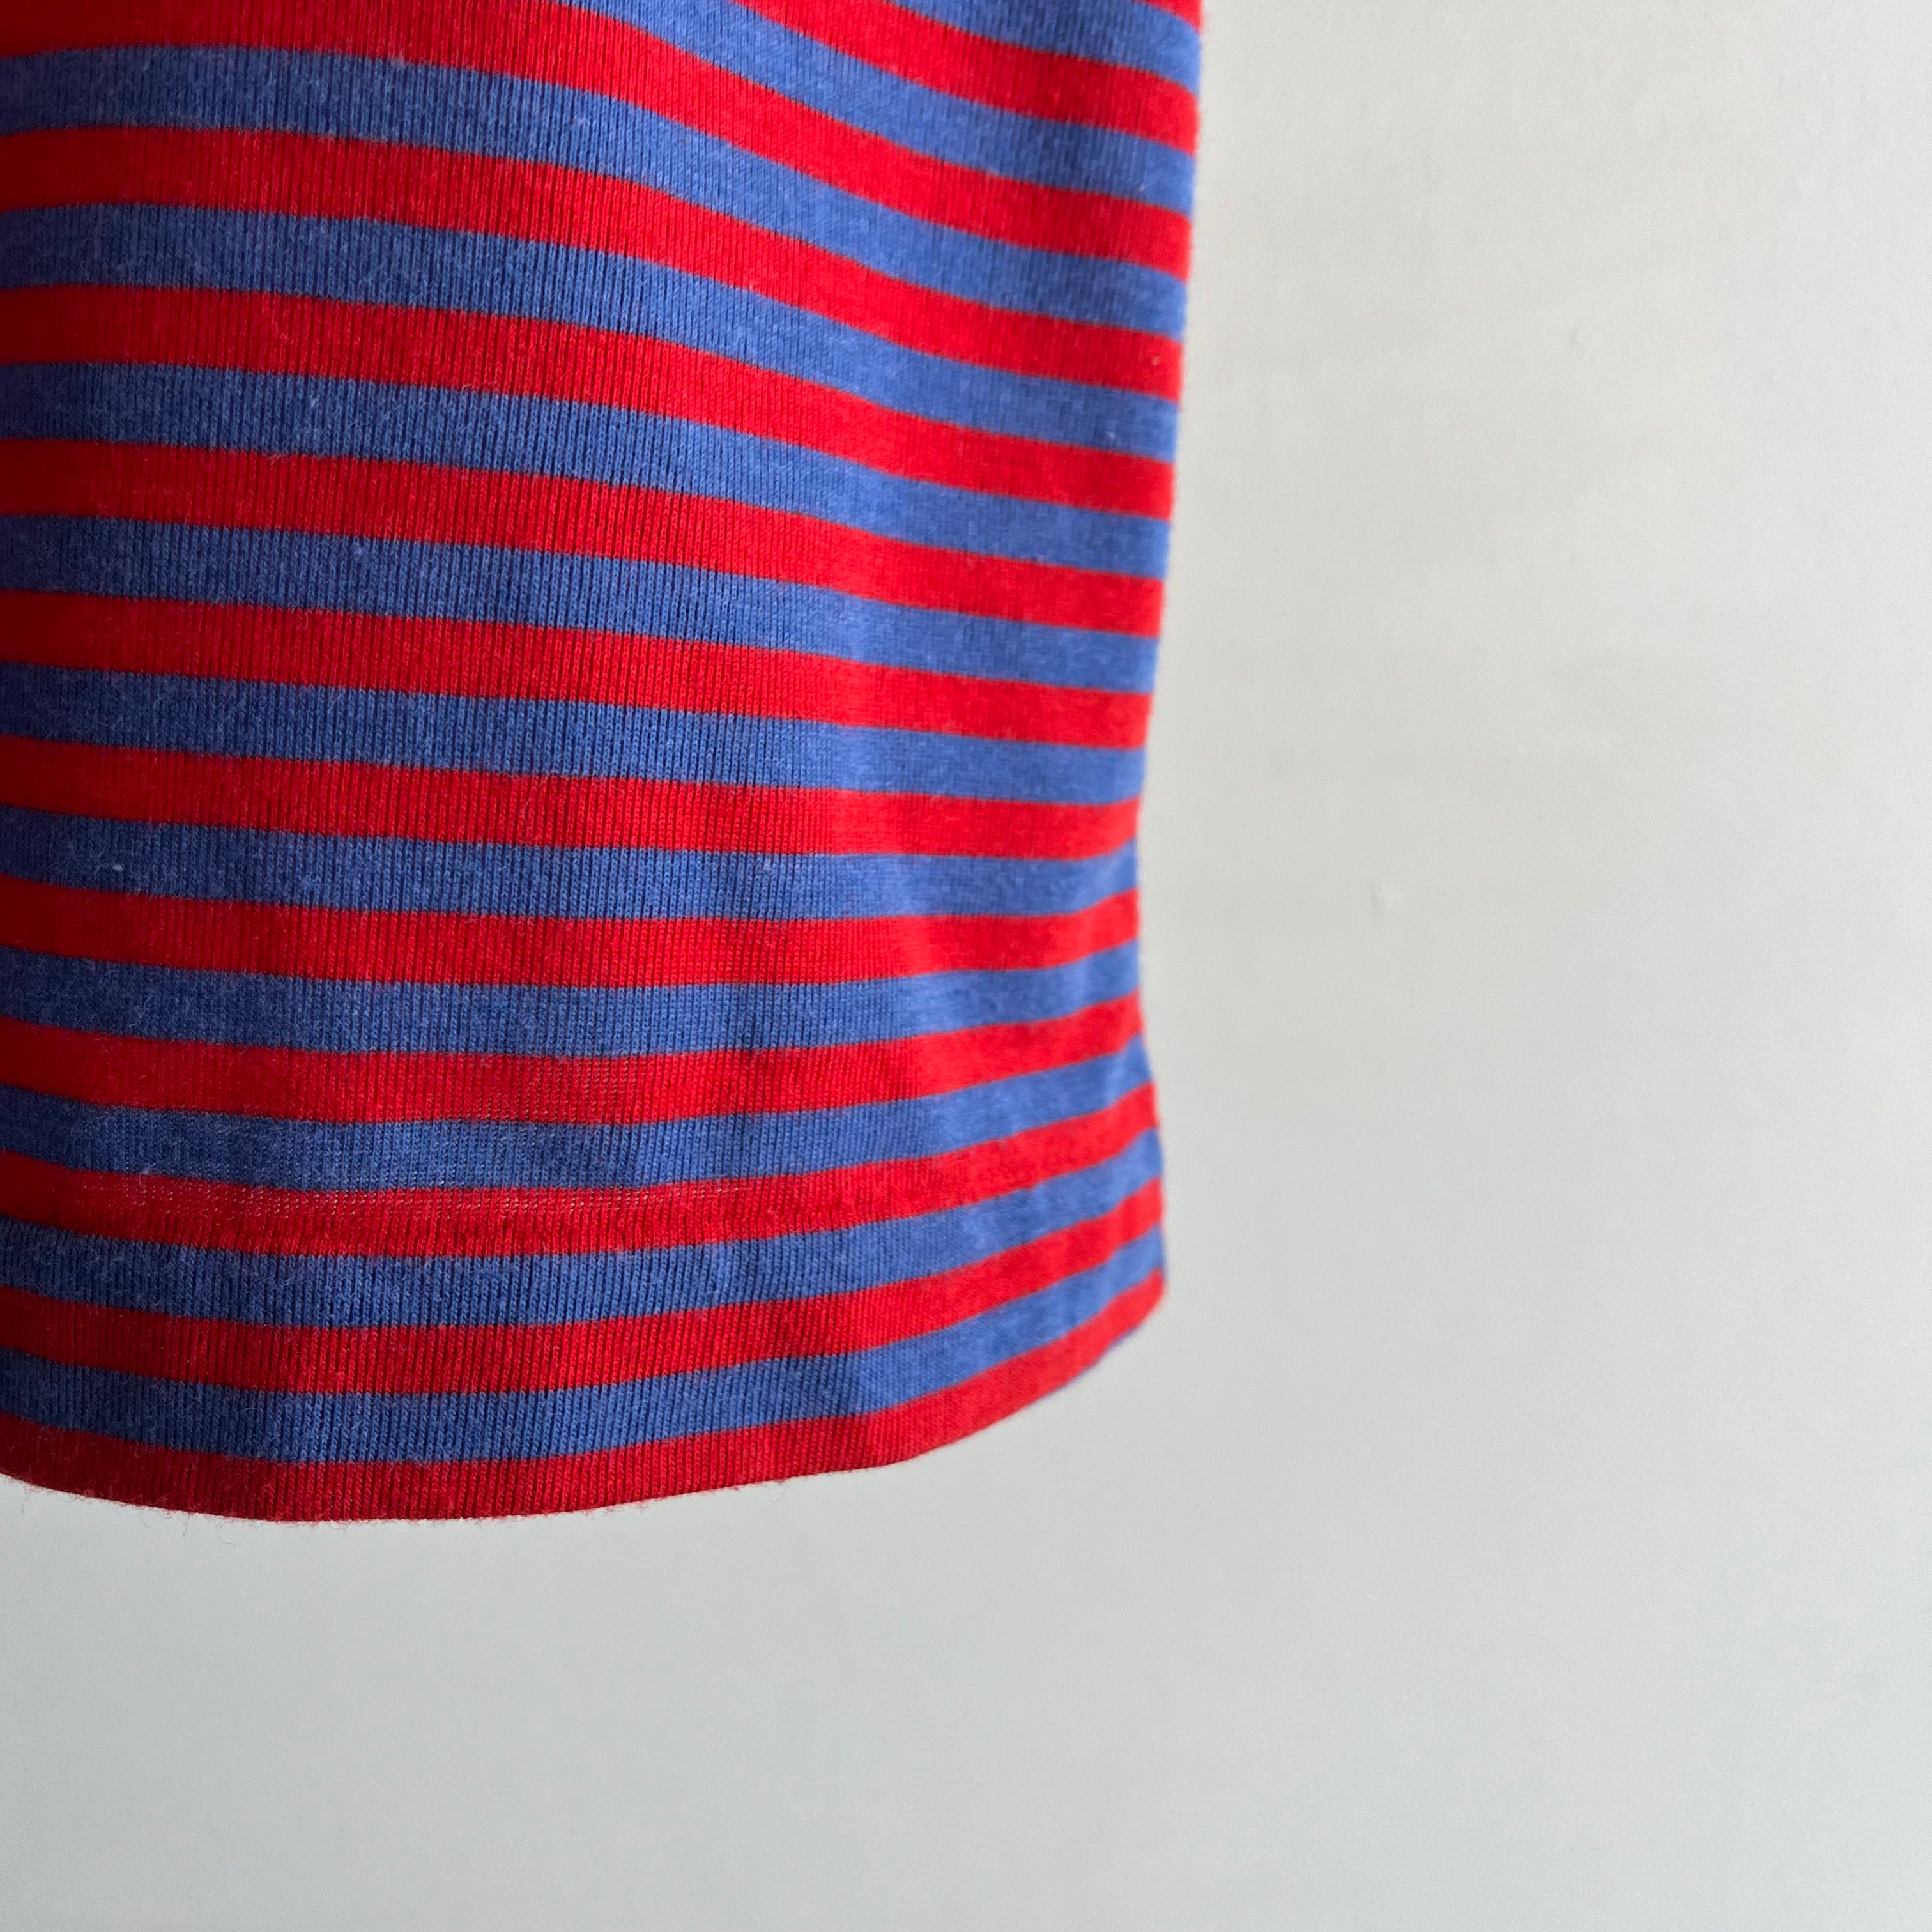 1980s Red, White and Blue Striped Polo Shirt